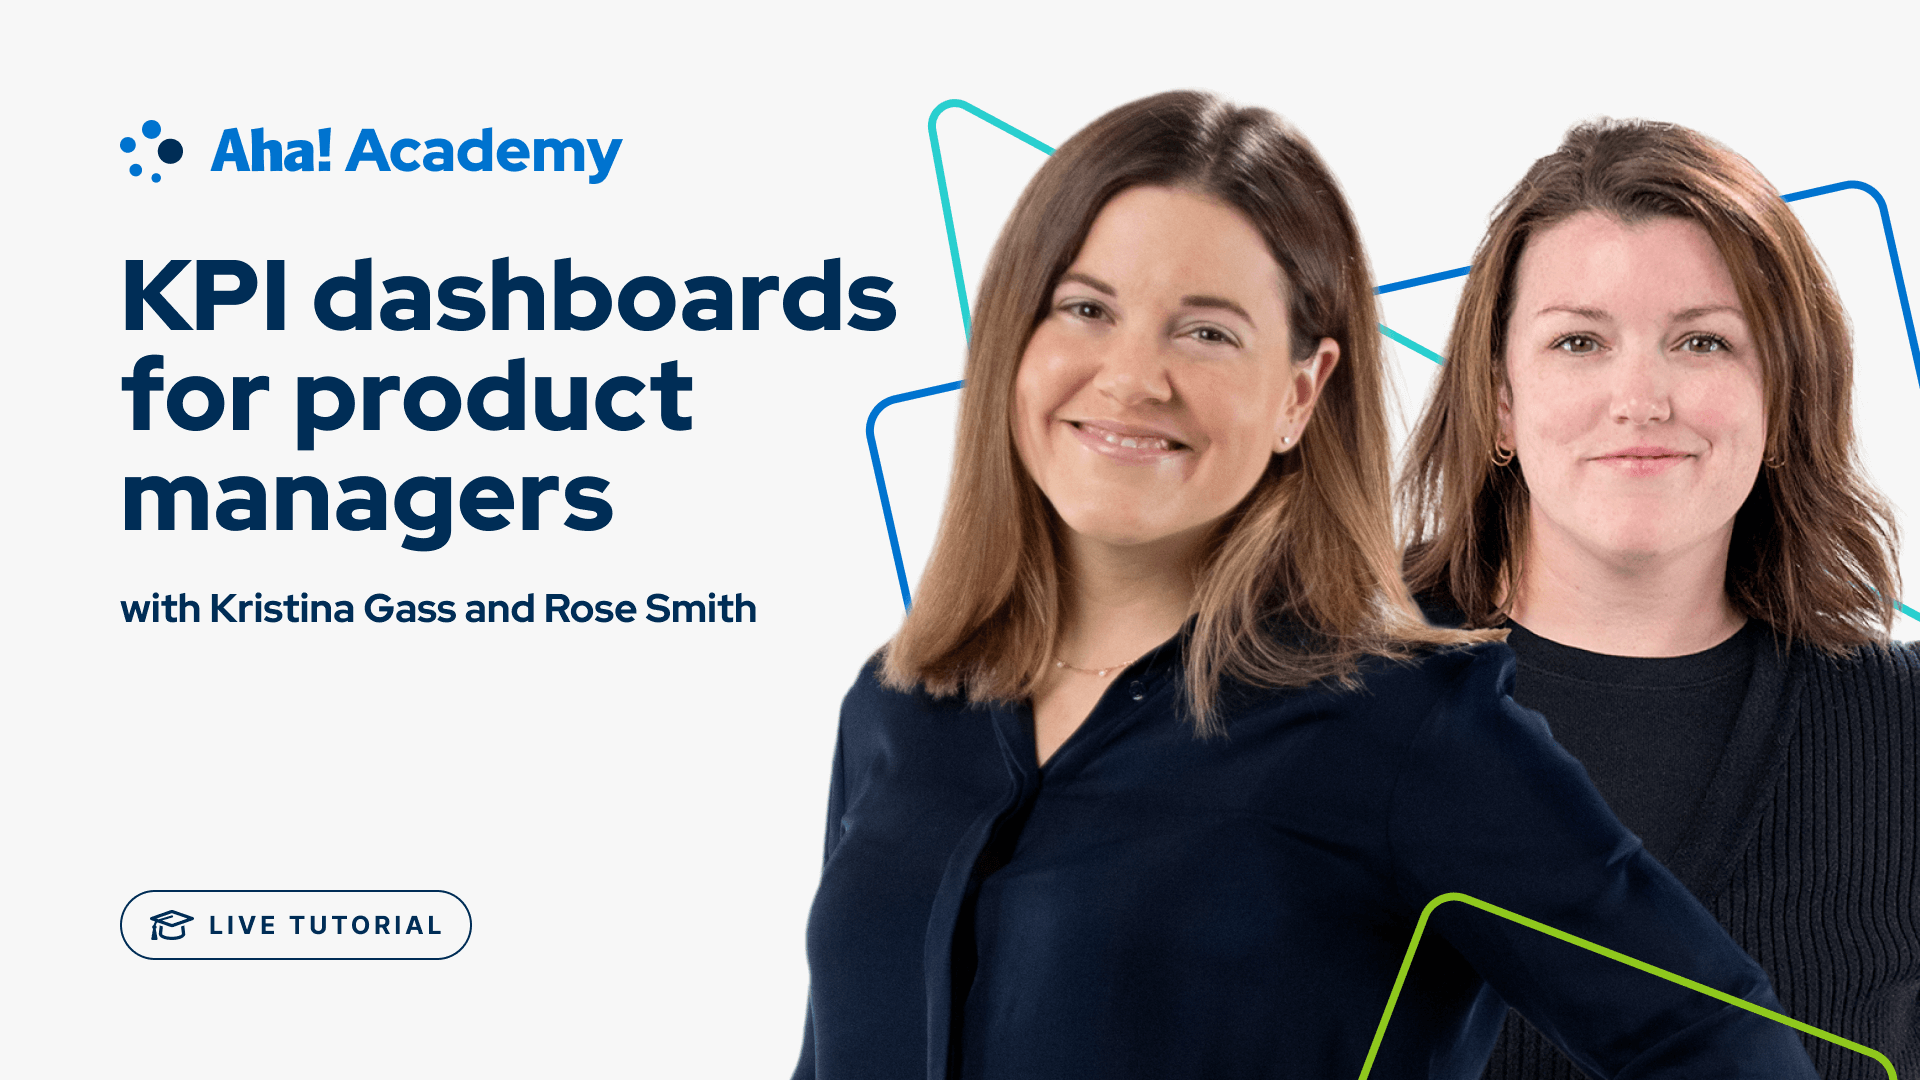 Aha! Academy live tutorial about KPI dashboards for product managers with Kristina Gass and Rose Smith.